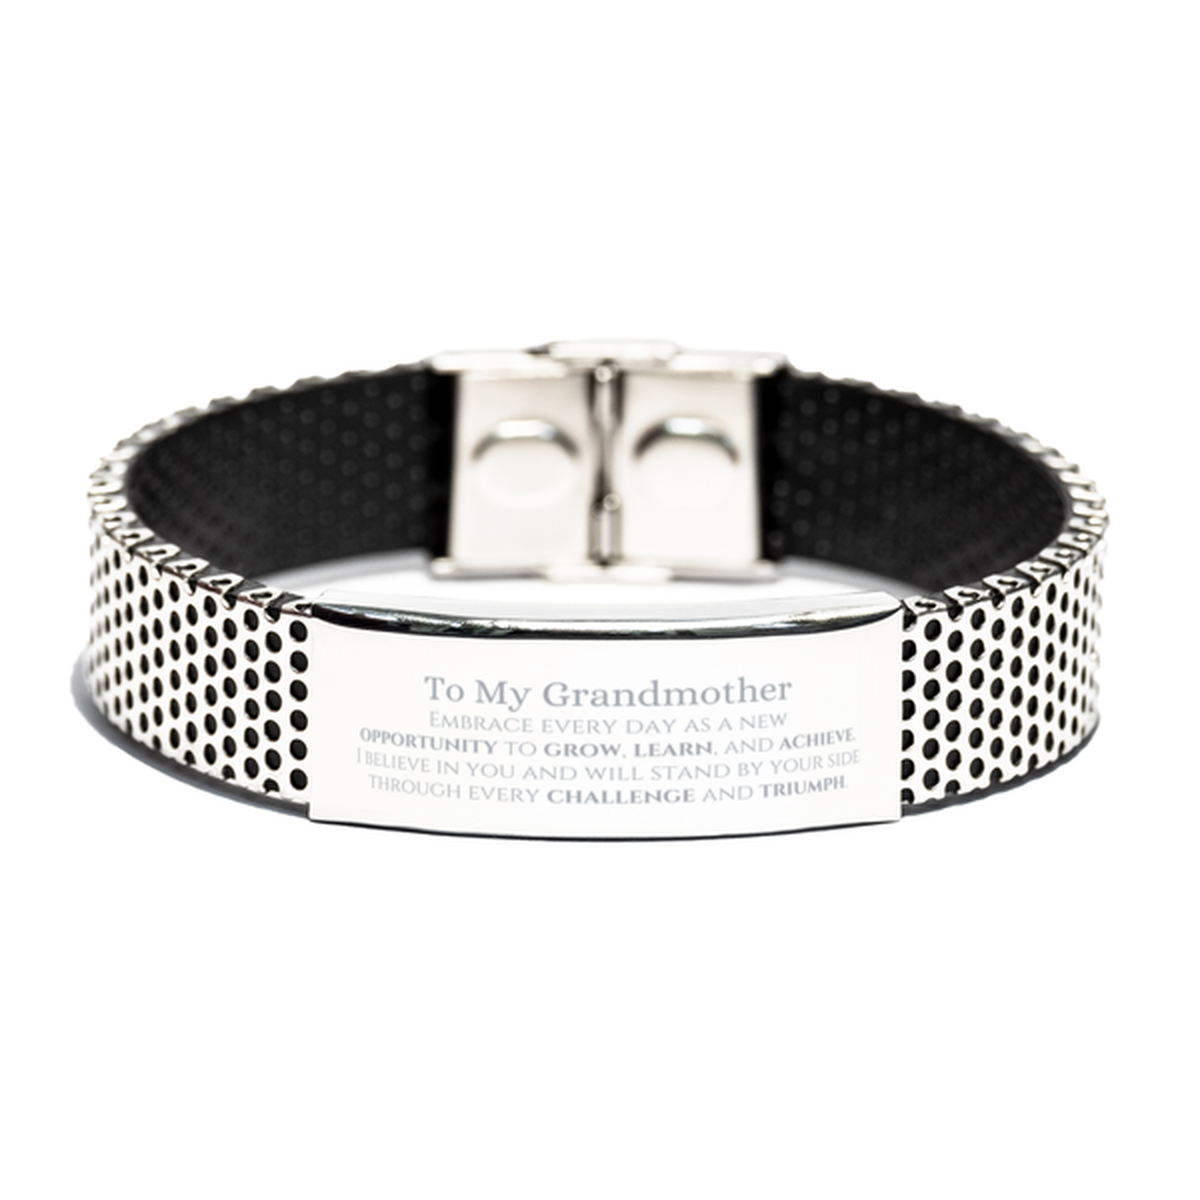 To My Grandmother Gifts, I believe in you and will stand by your side, Inspirational Stainless Steel Bracelet For Grandmother, Birthday Christmas Motivational Grandmother Gifts